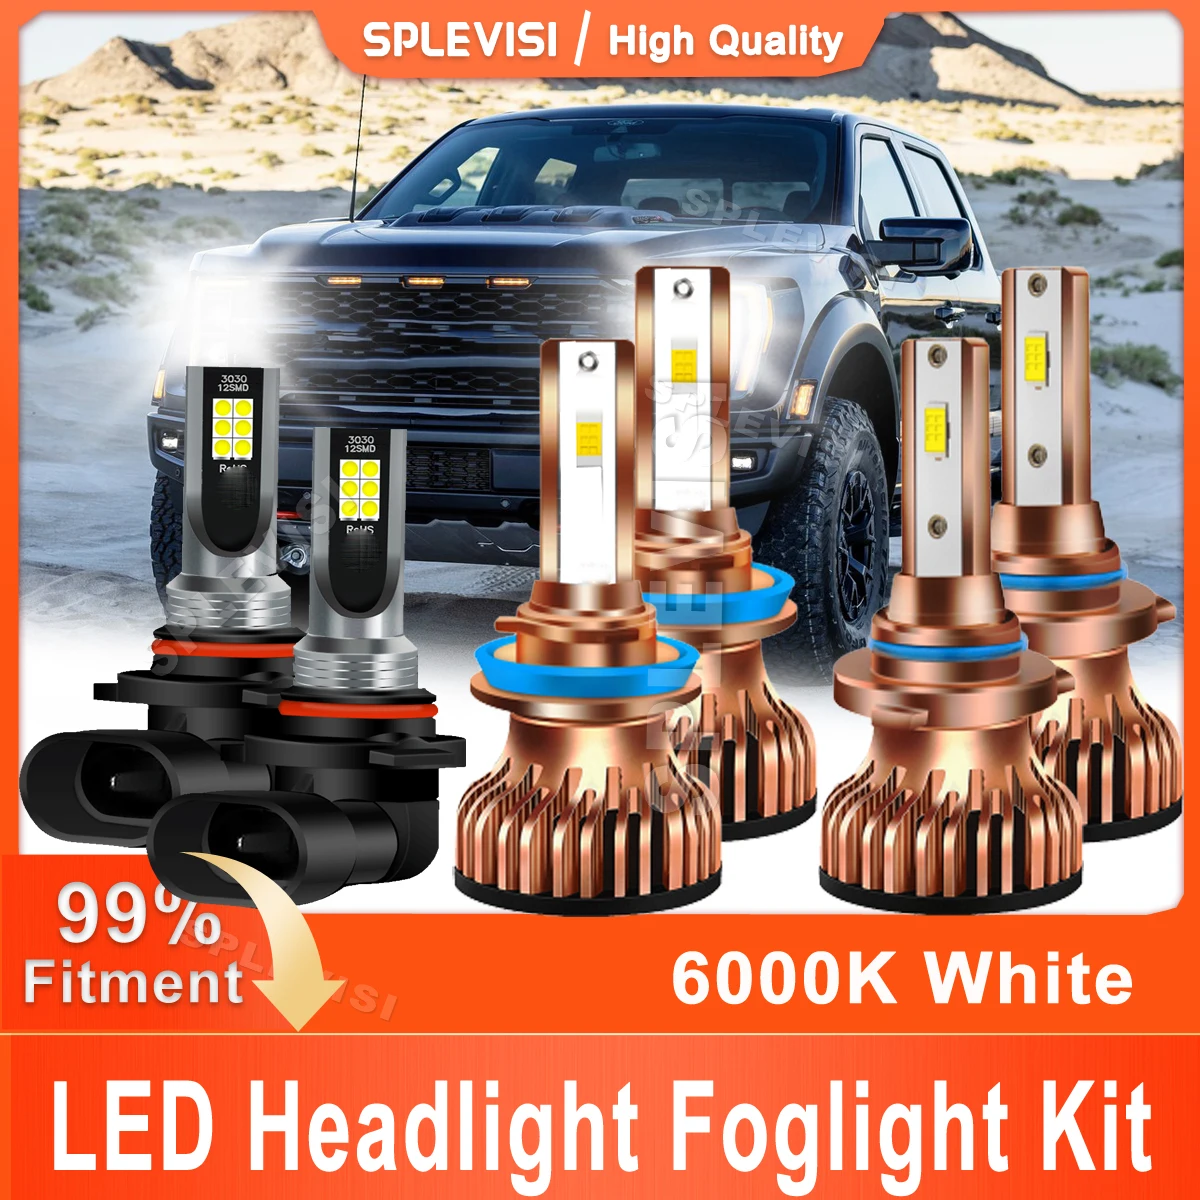 

LED Car Headlight 9005 High Beam H11 Low Beam 9145 Foglight Replace For Ford F150 2015 2016 2017 2018 2019 2020 2021 2022 2023